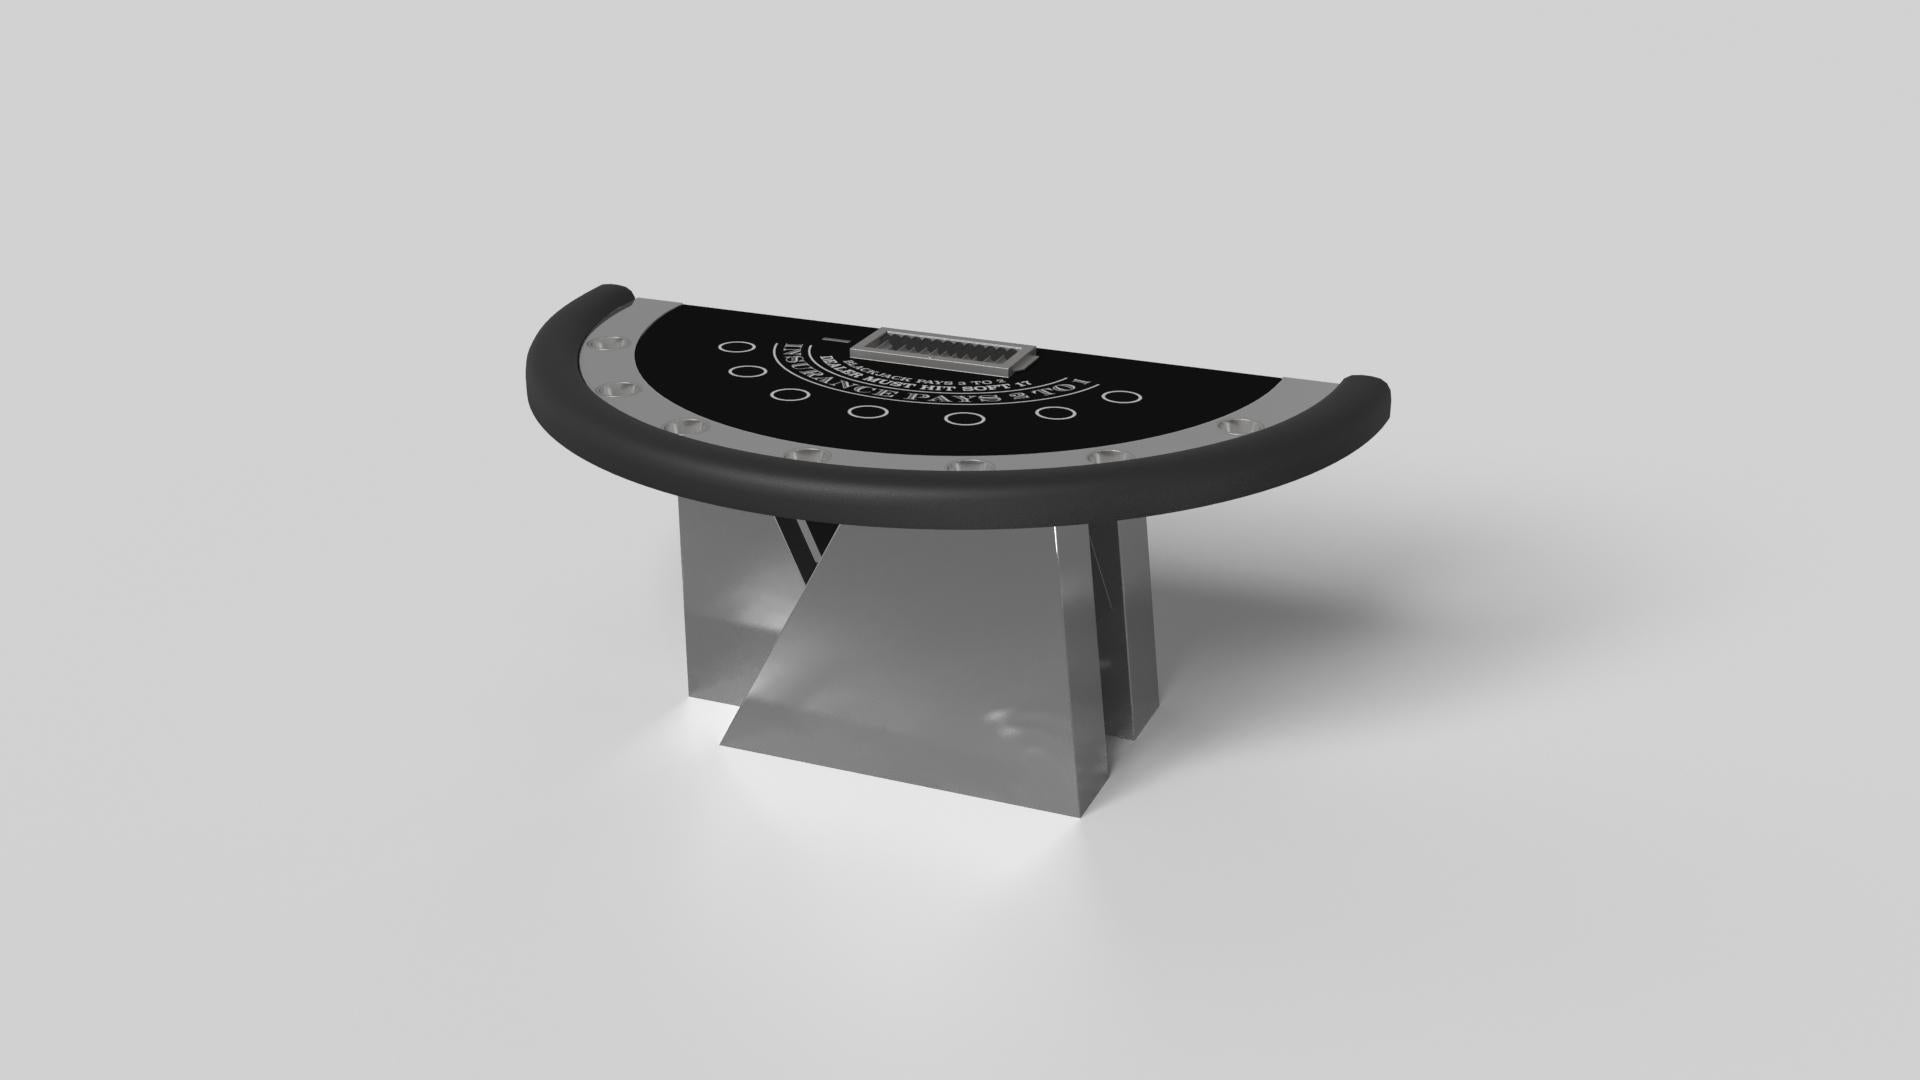 An asymmetric base creates a free-floating silhouette, making the Stilt blackjack table in walnut a compelling, contemporary addition to the modern home. Detailed with a chip rack and betting circles, this luxury handcrafted game table boasts an